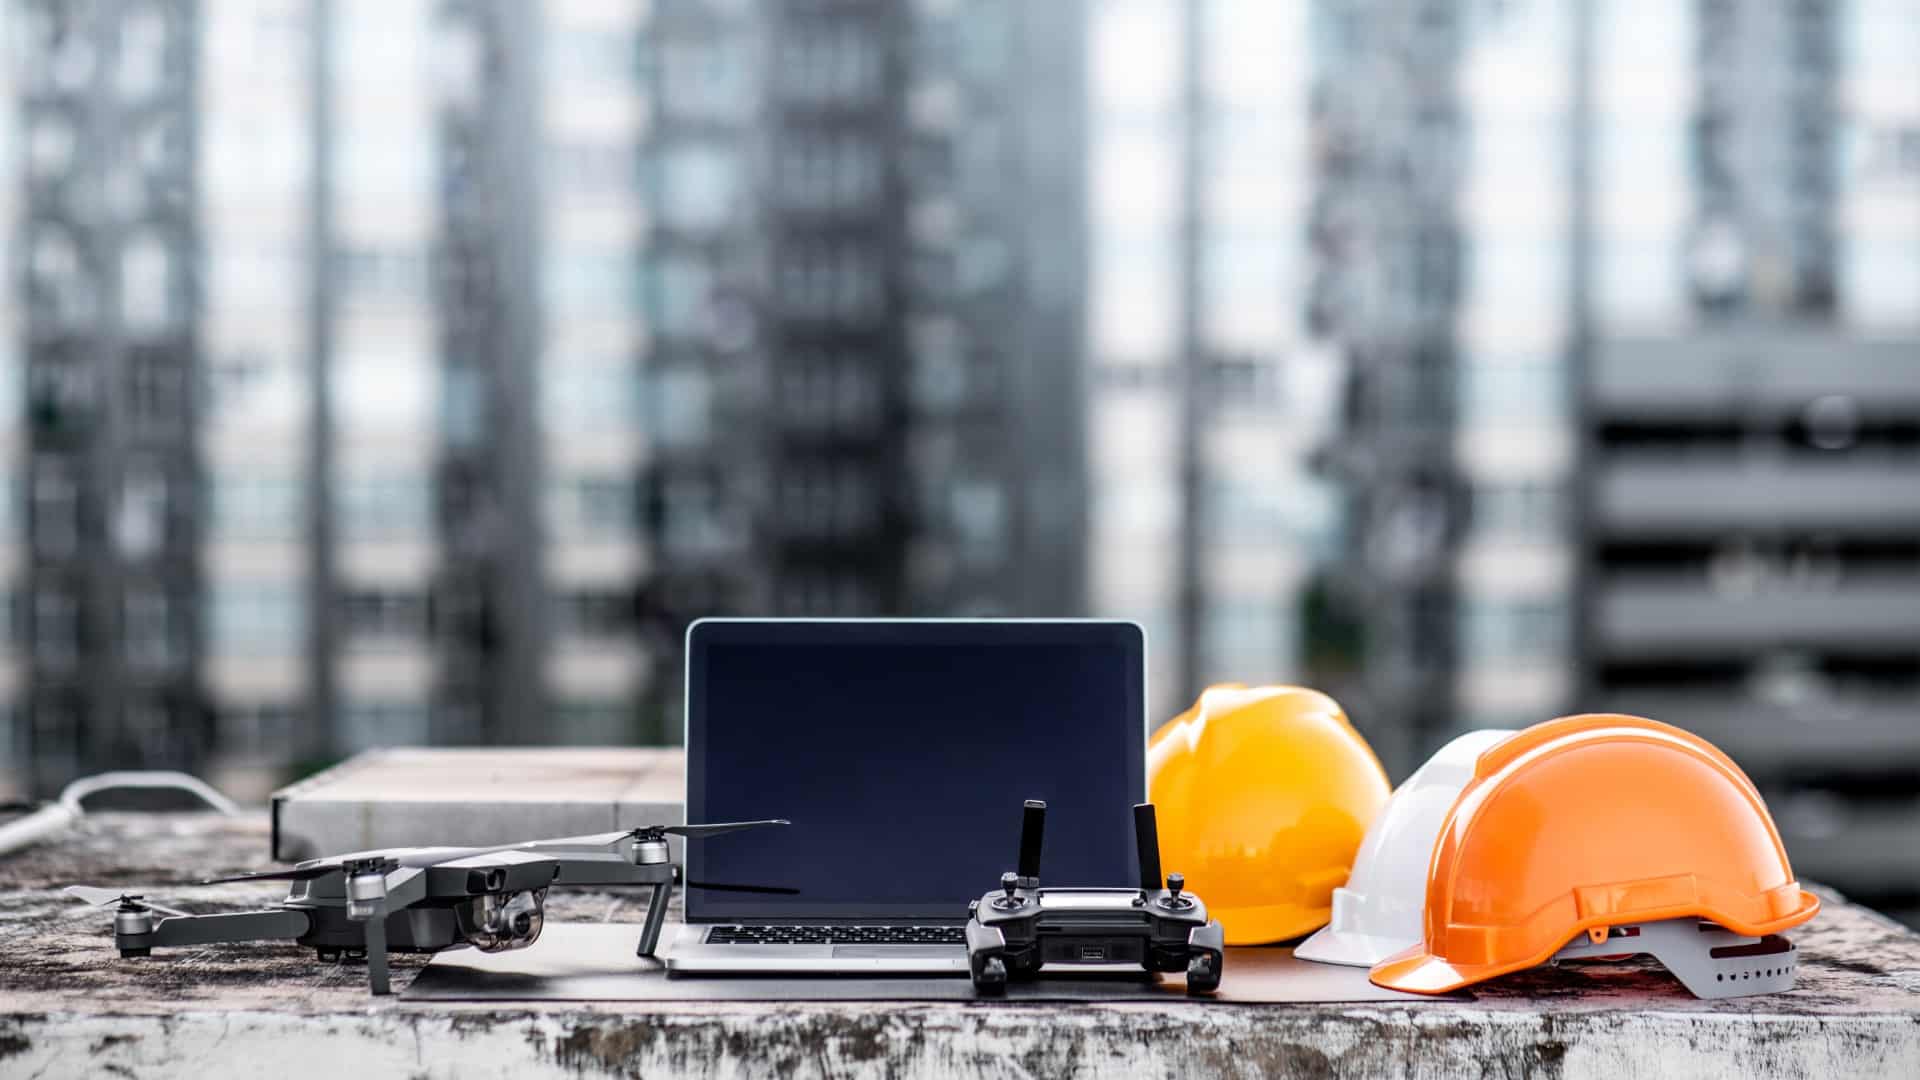 Our second tip for videotaping your construction projects is using high quality equipment, like the laptop and drone featured here.